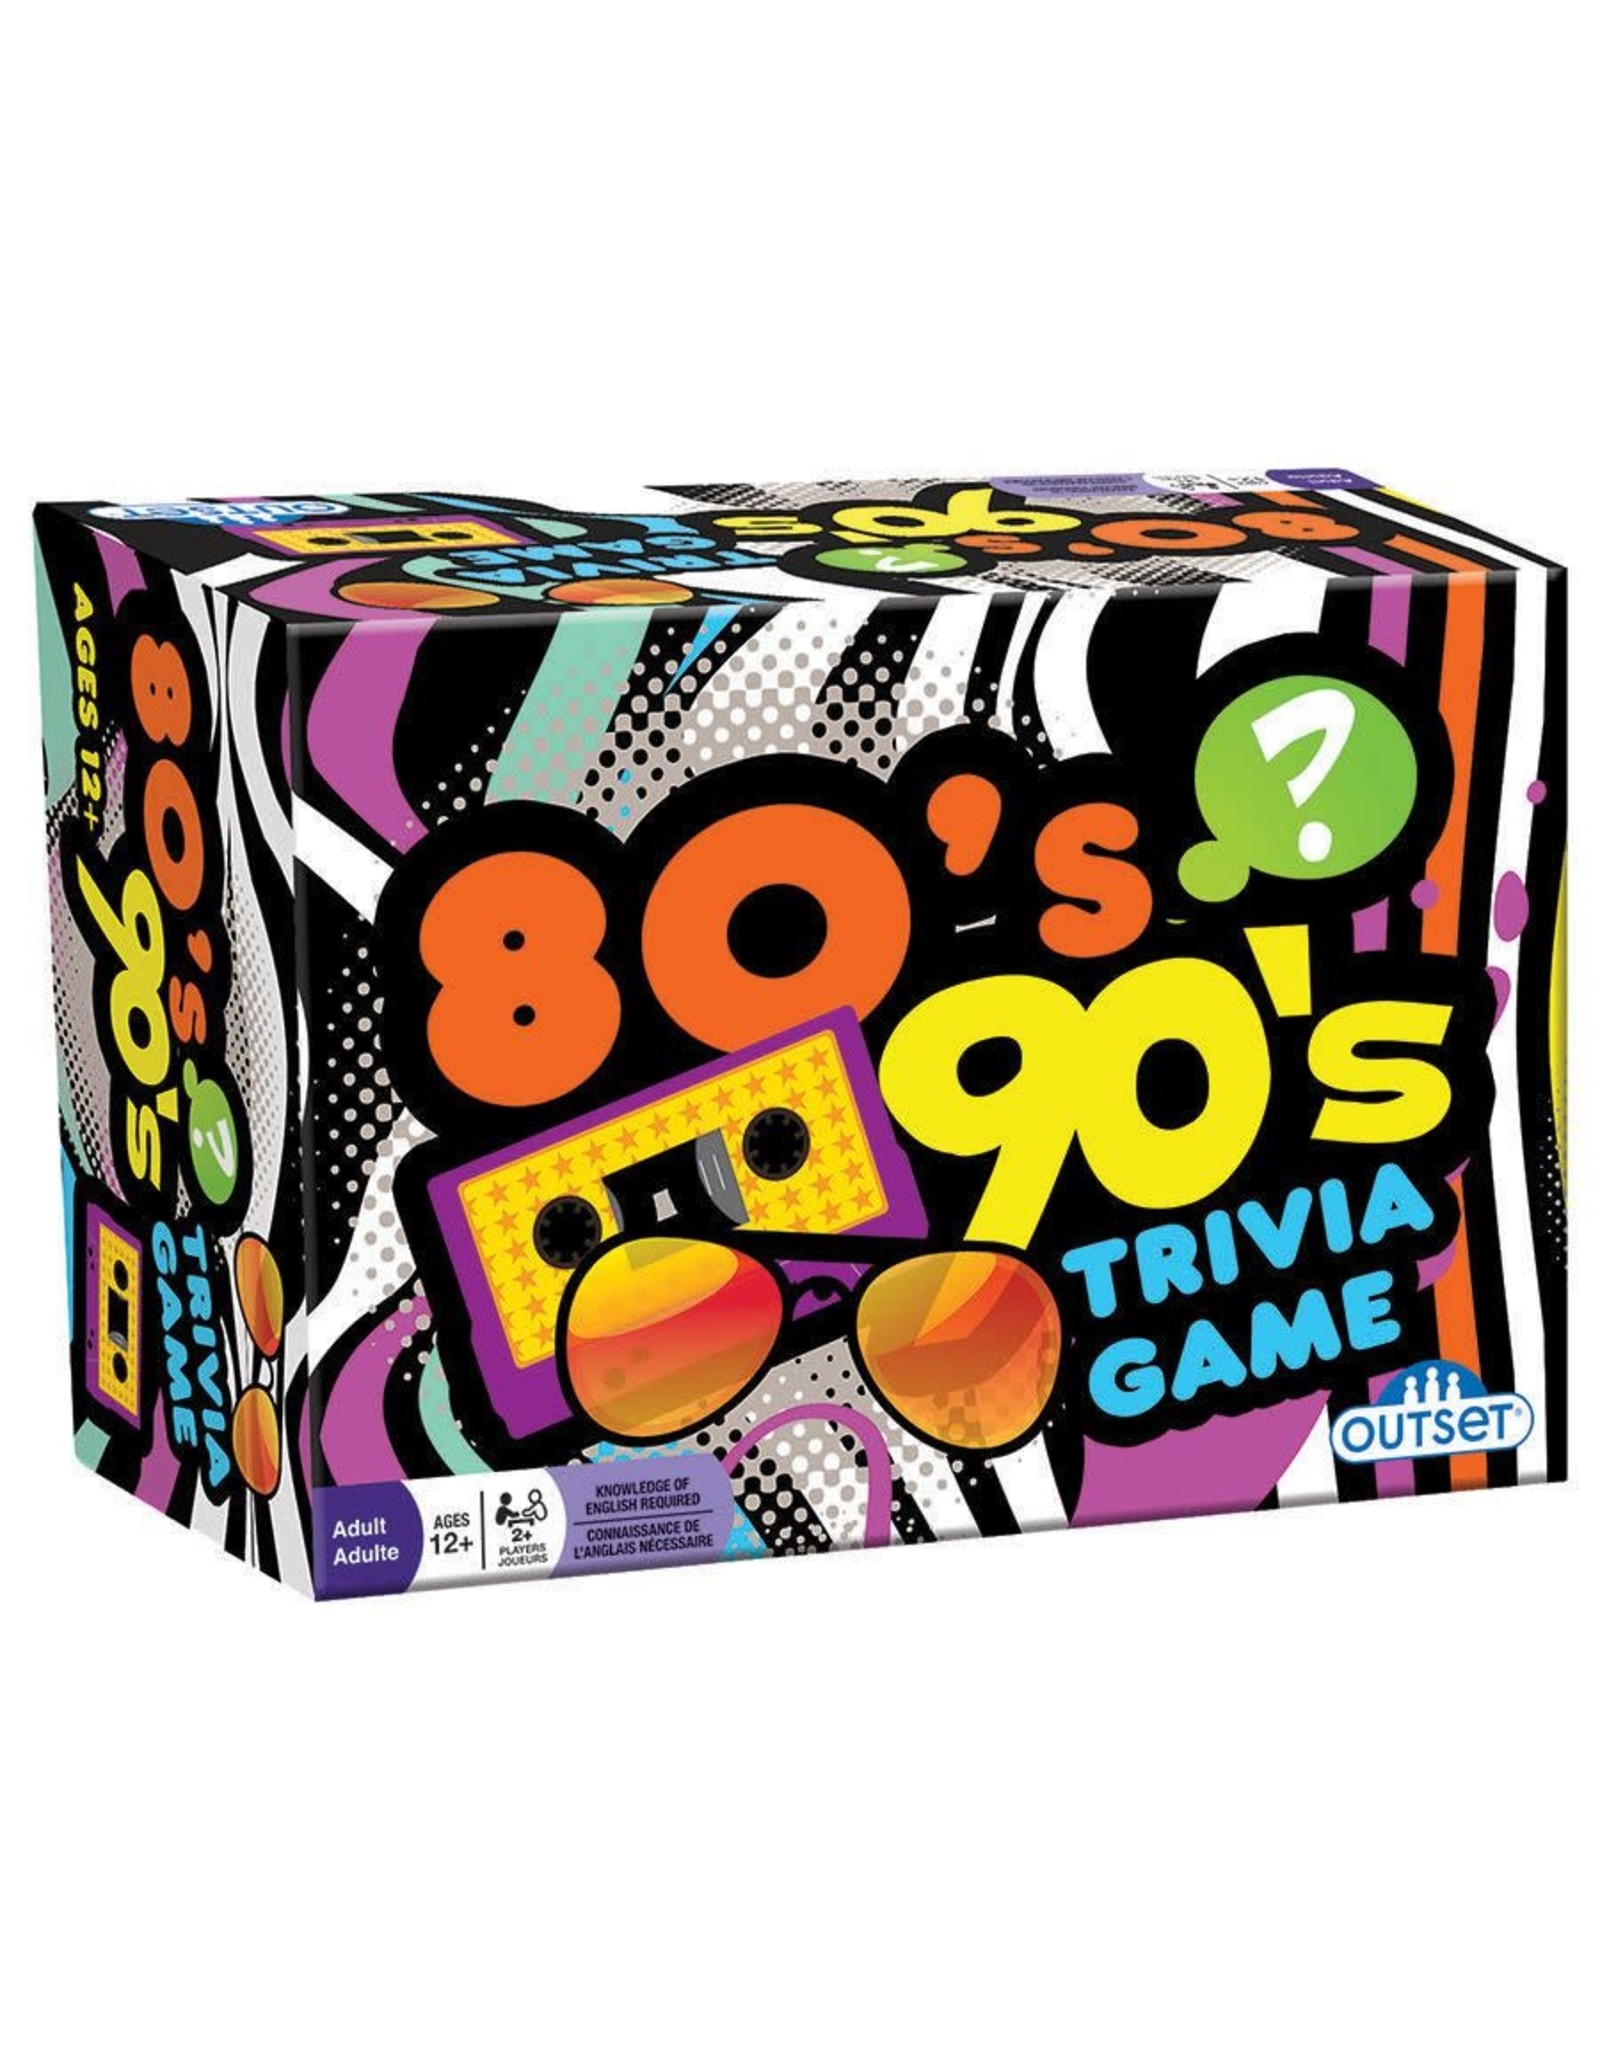 Outset Media 80s 90s Trivia Game